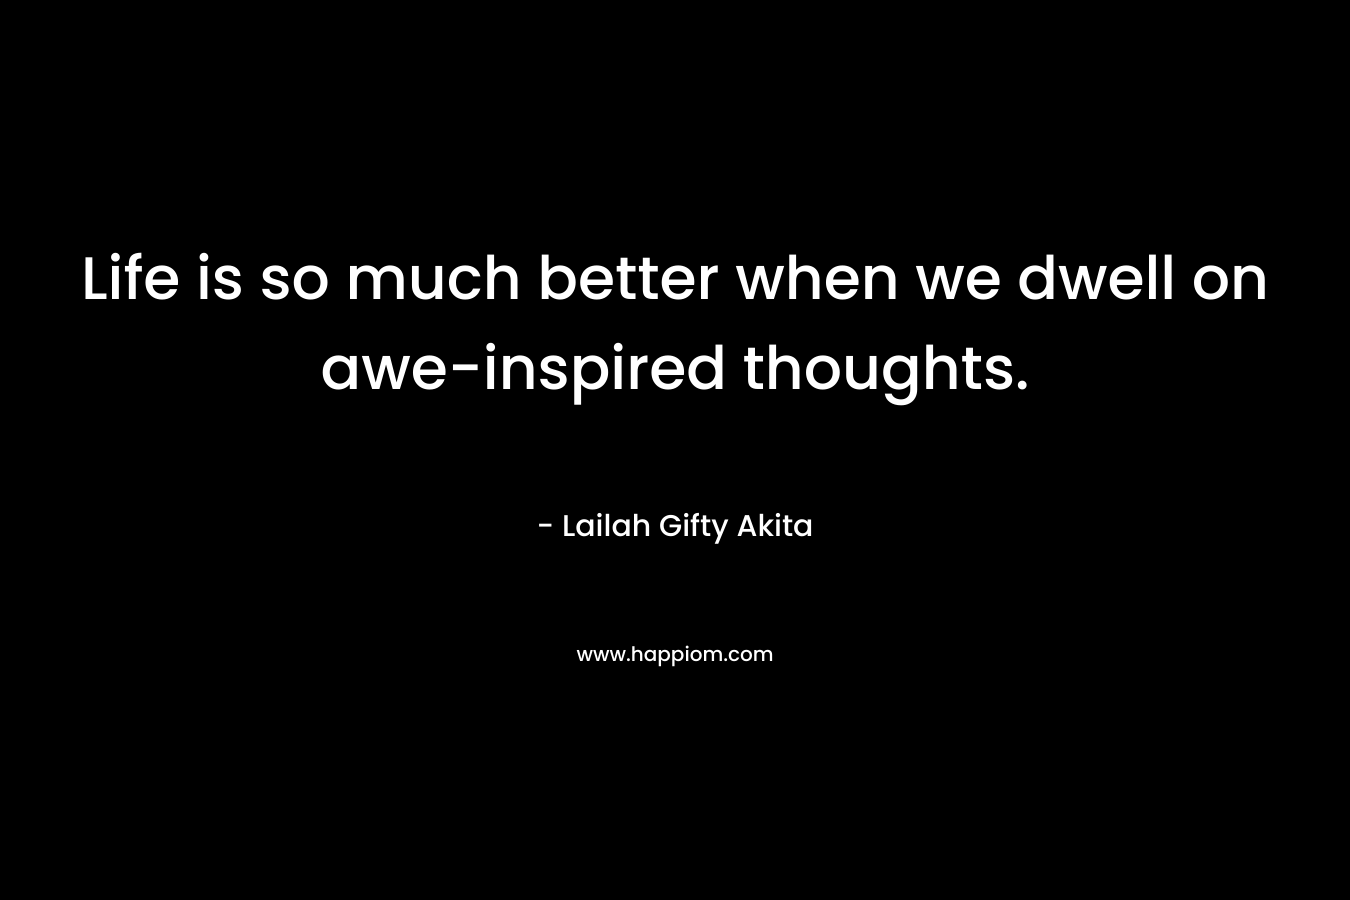 Life is so much better when we dwell on awe-inspired thoughts.